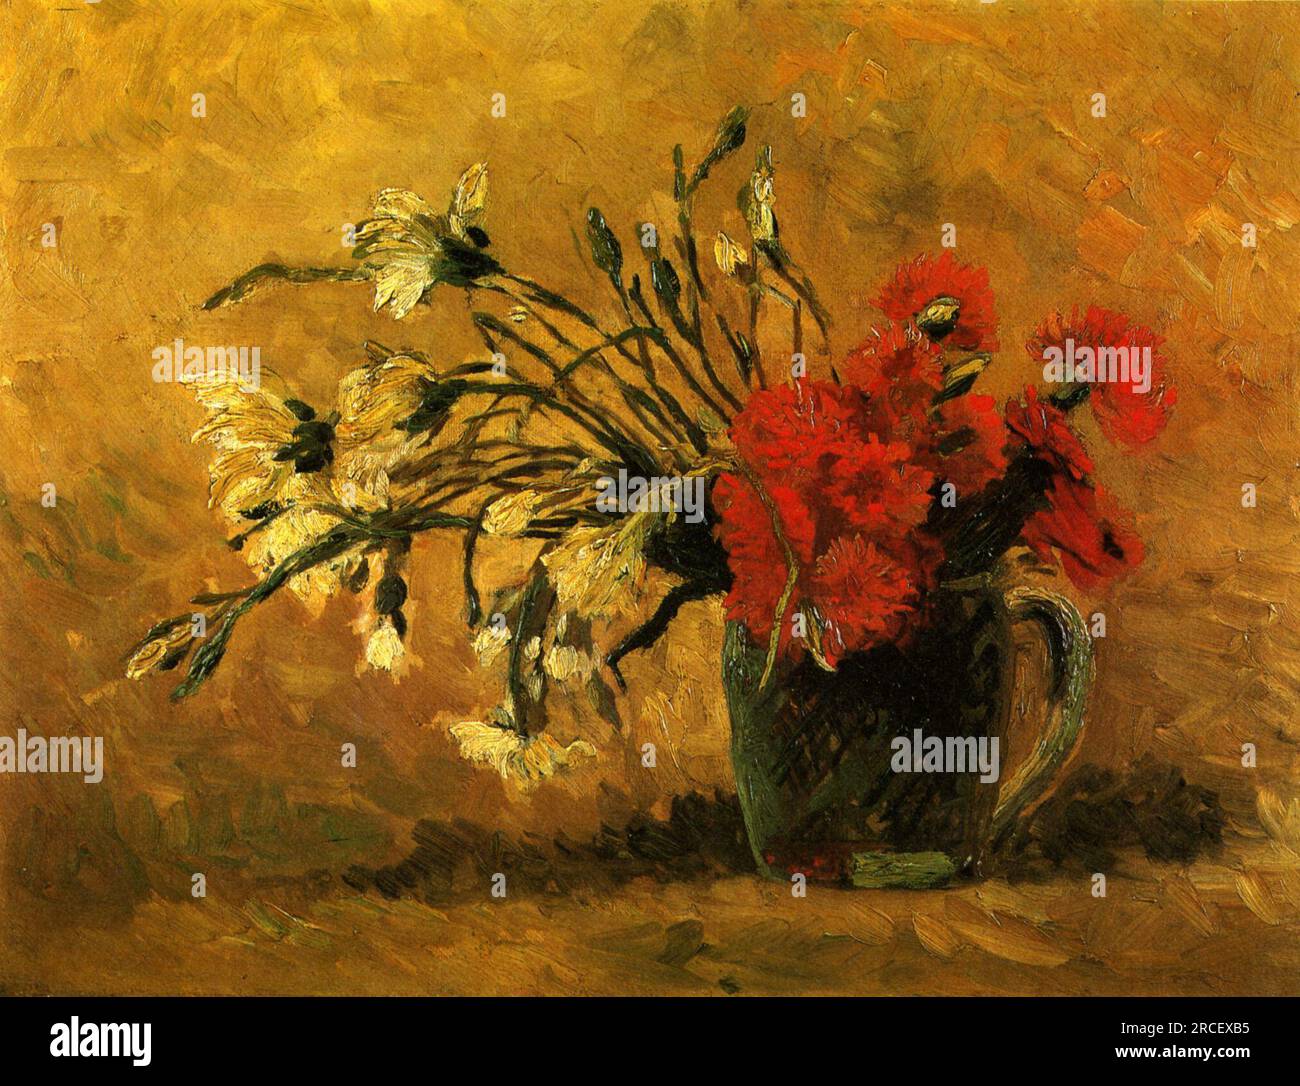 Vase with Red and White Carnations on a Yellow Background 1886 by Vincent van Gogh Stock Photo